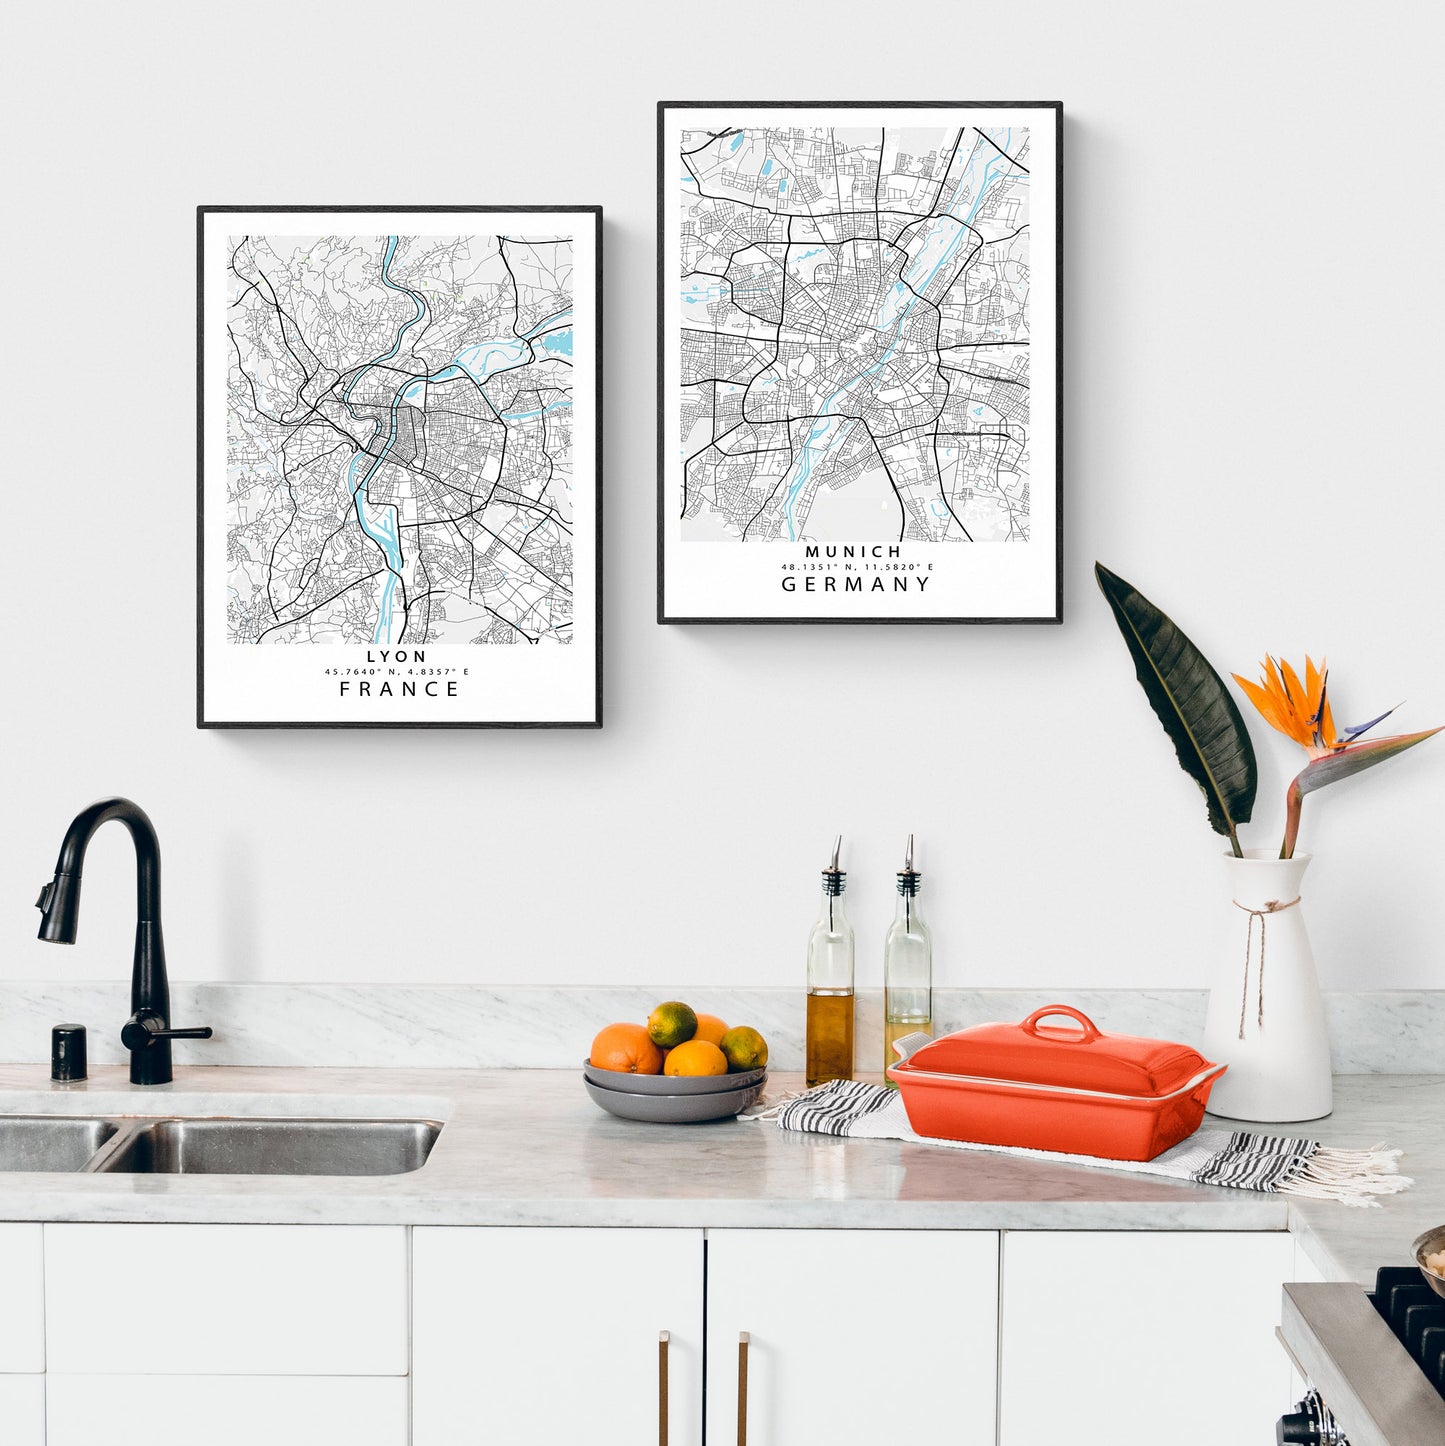 Discover the cities of the world with these gorgeous Munich Street Map Posters! Get up close and personal with Custom Map Art Prints and custom street map posters, perfect for adding a touch of world charm to any wall. Maps and cities posters are the perfect way to show off your love of globetrotting - and with posters and prints with maps, it's never been easier!